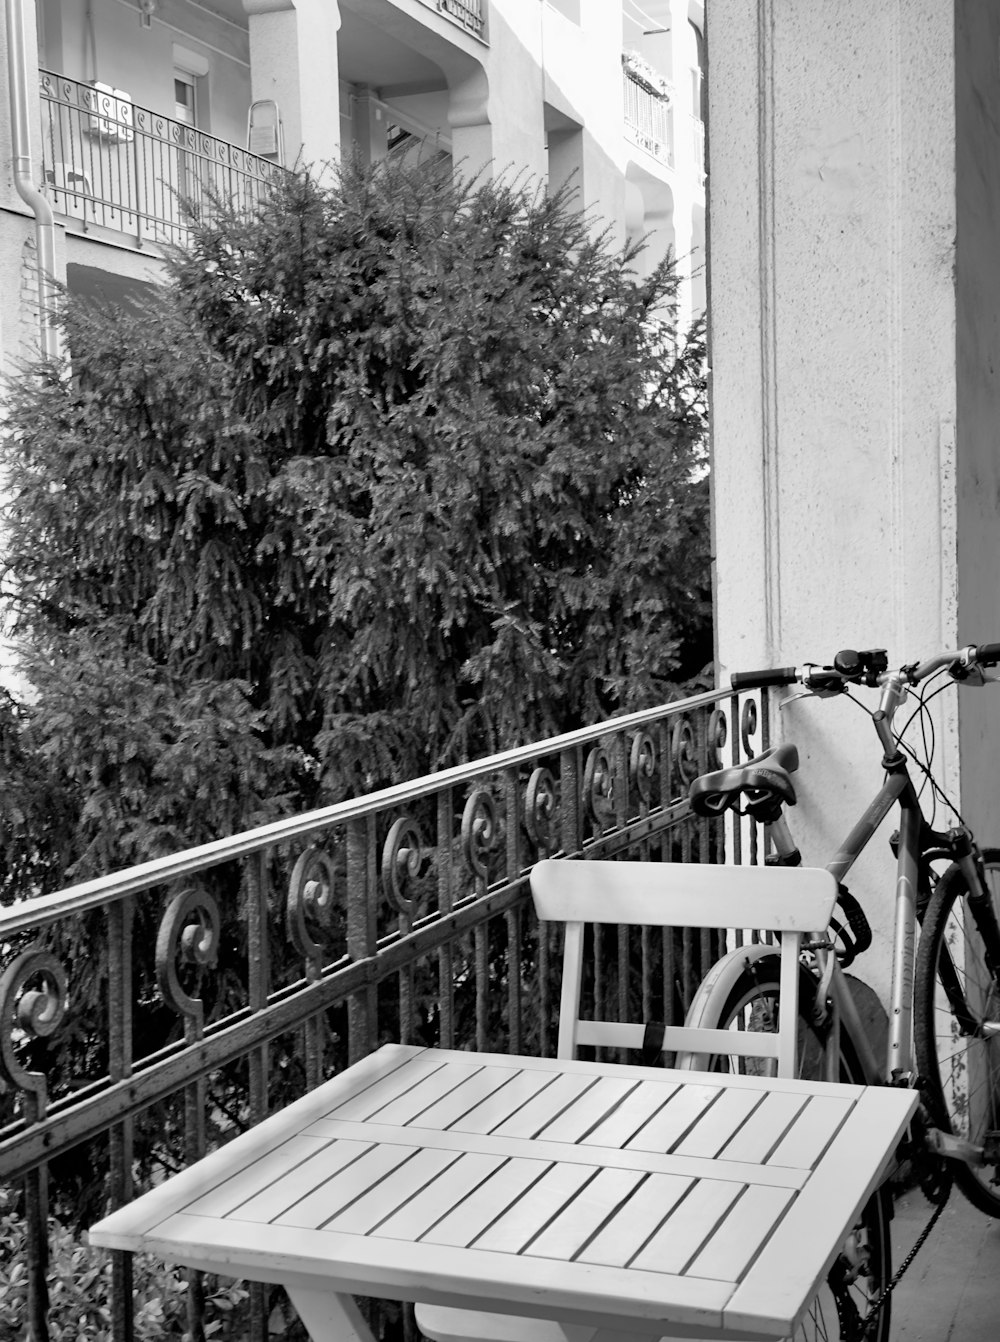 a bicycle parked next to a table on a balcony